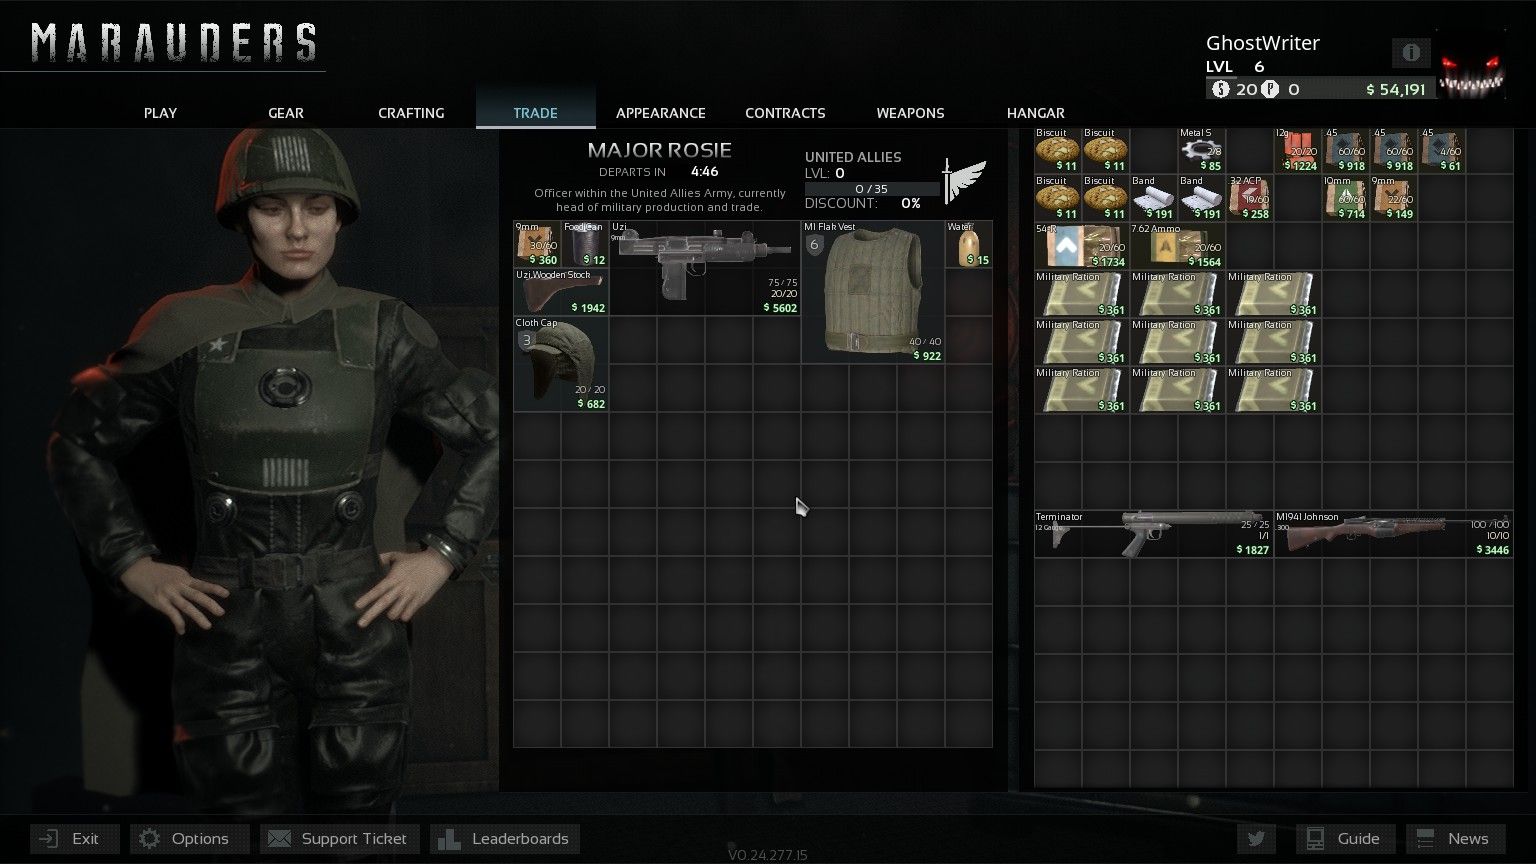 Screenshot of the game. The inventory screen, showing a level 6 character with regular armor.